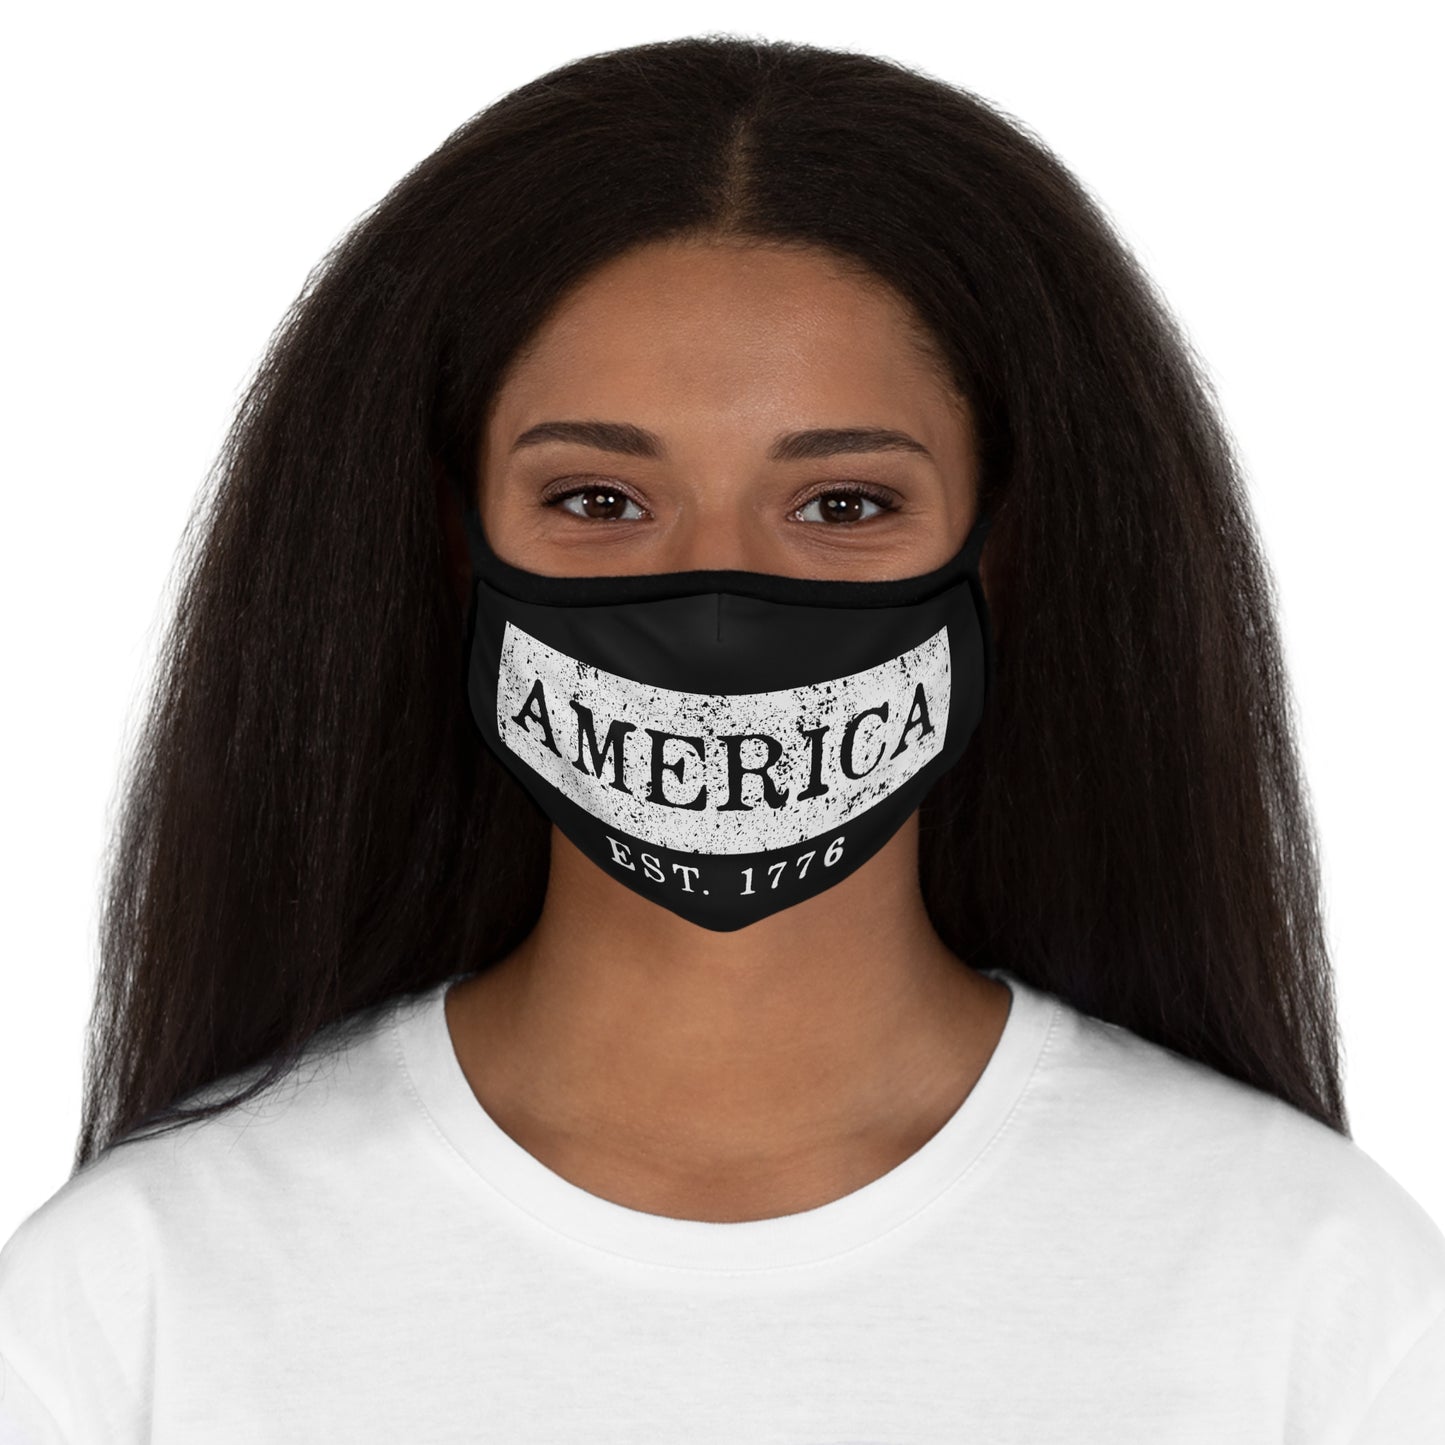 America Fitted Polyester Face Mask For the USA Patriot